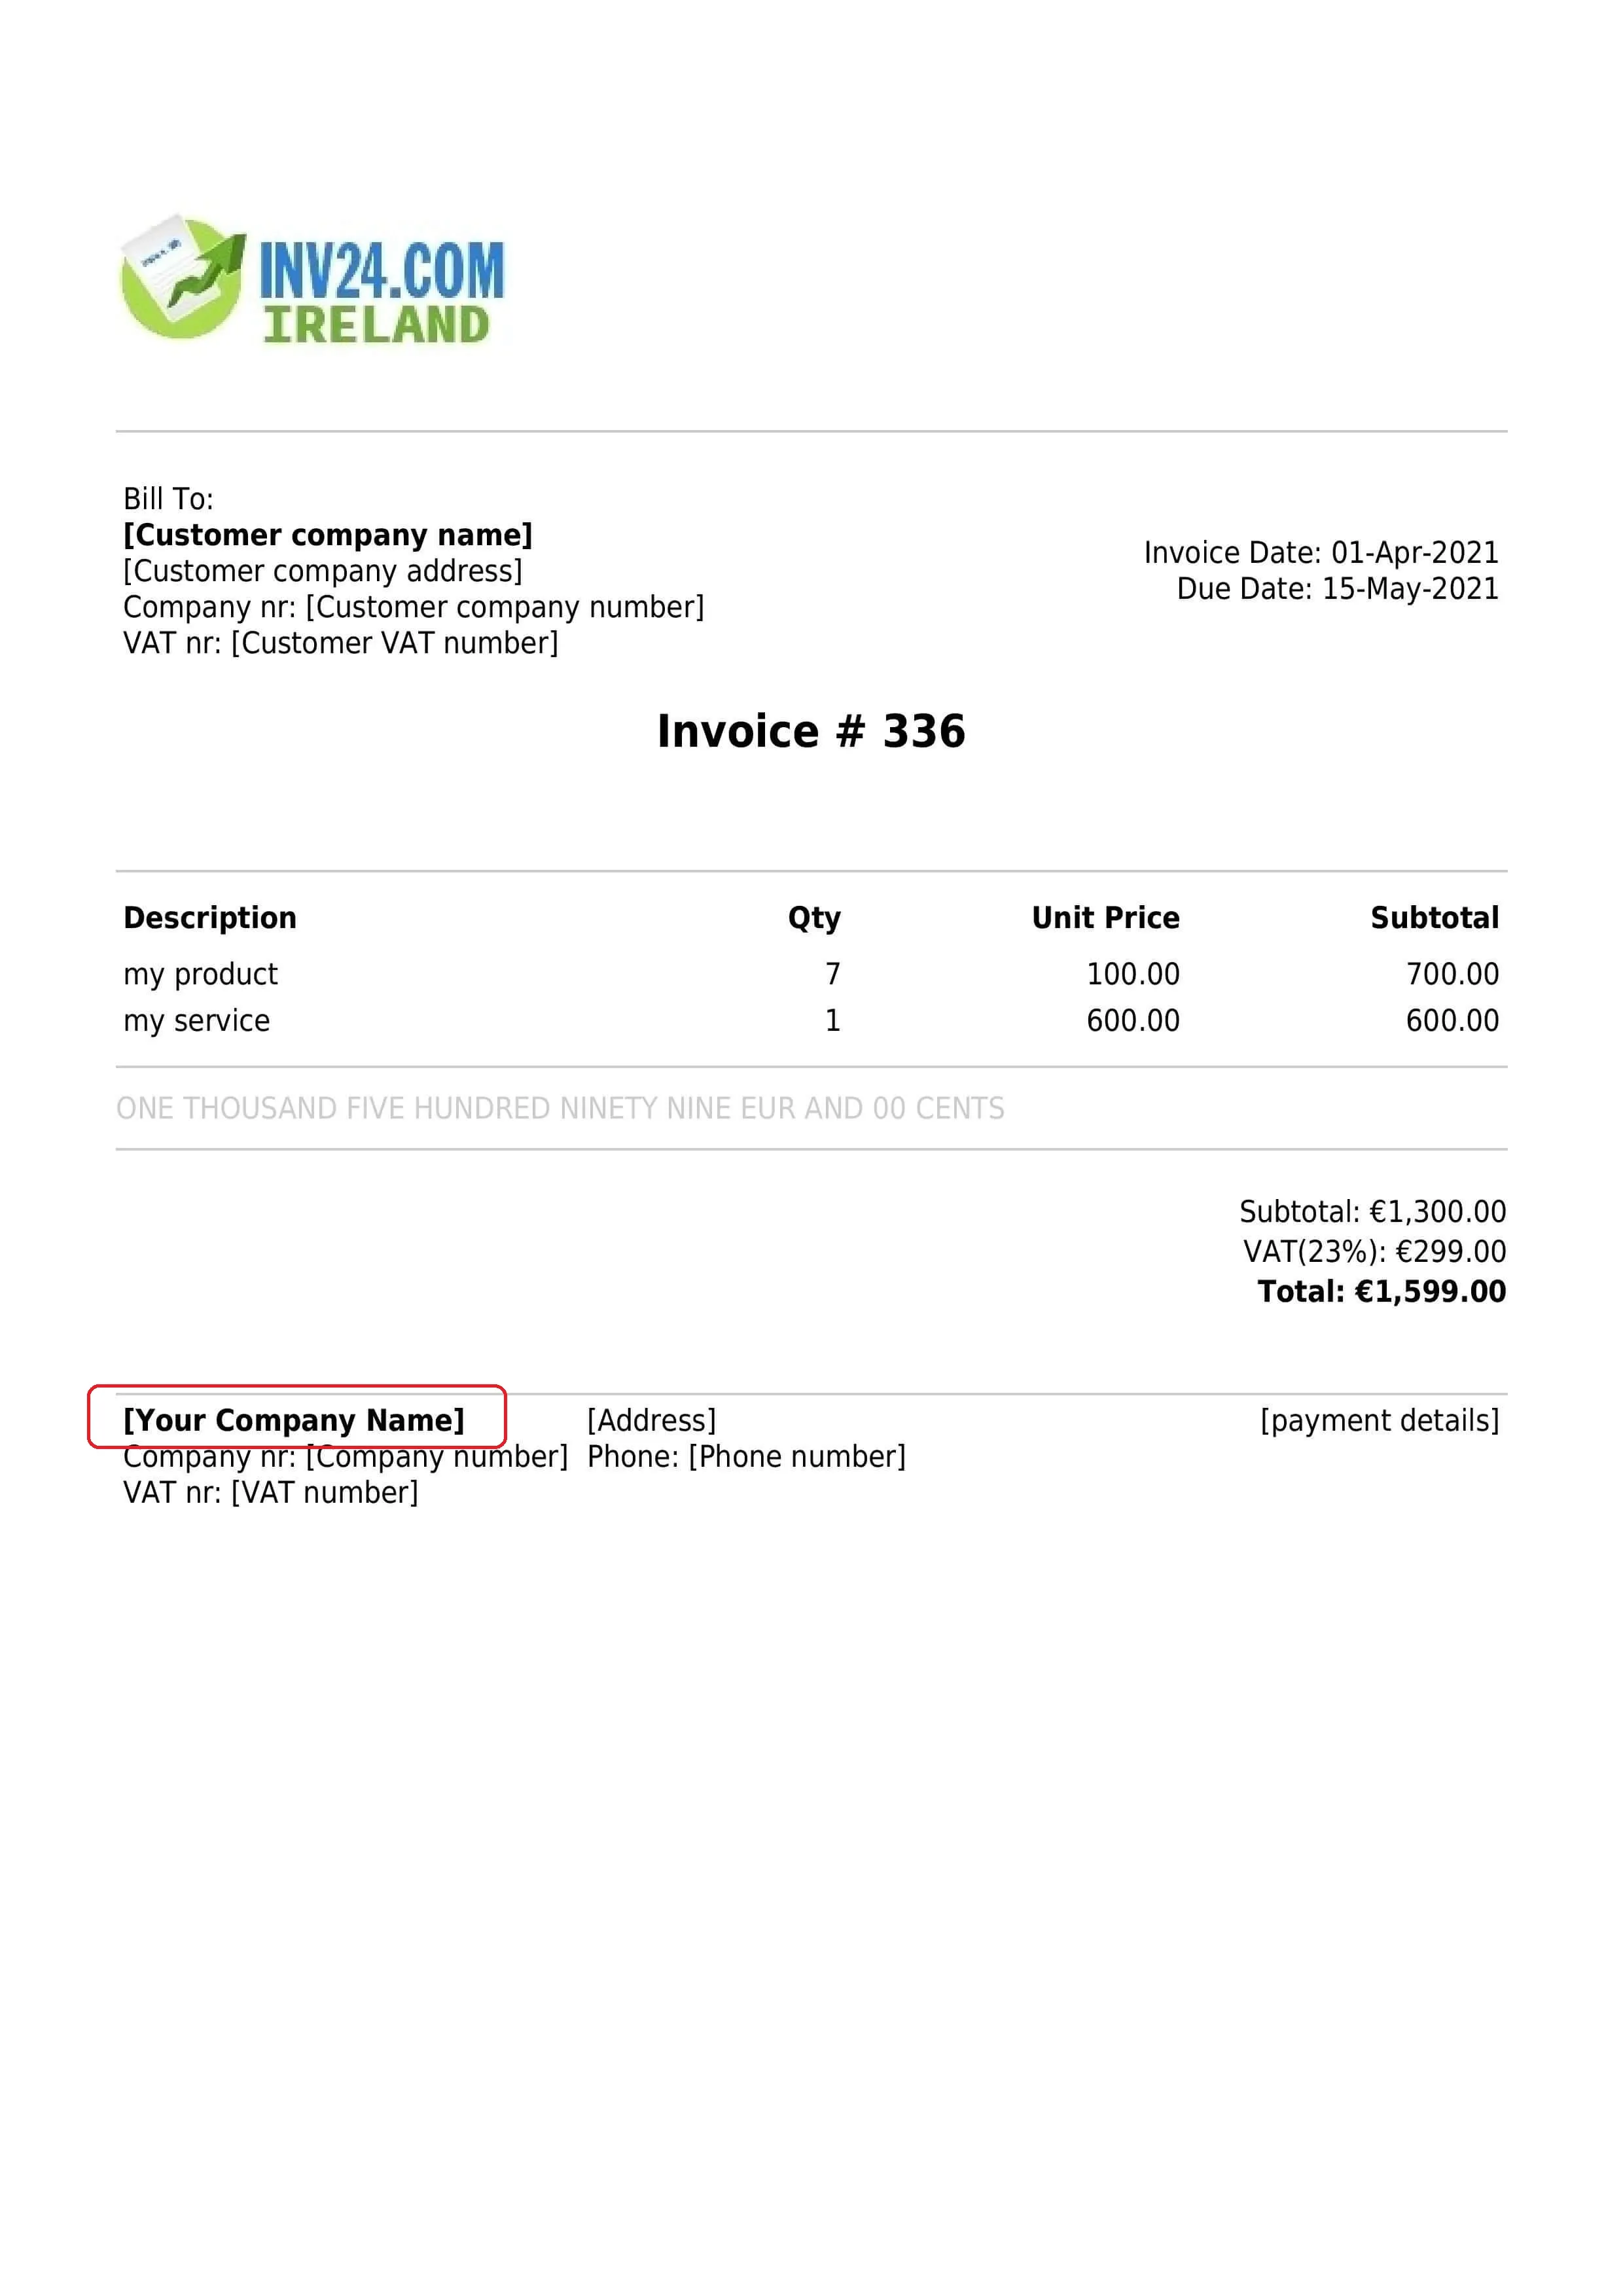 seller business name on the invoice